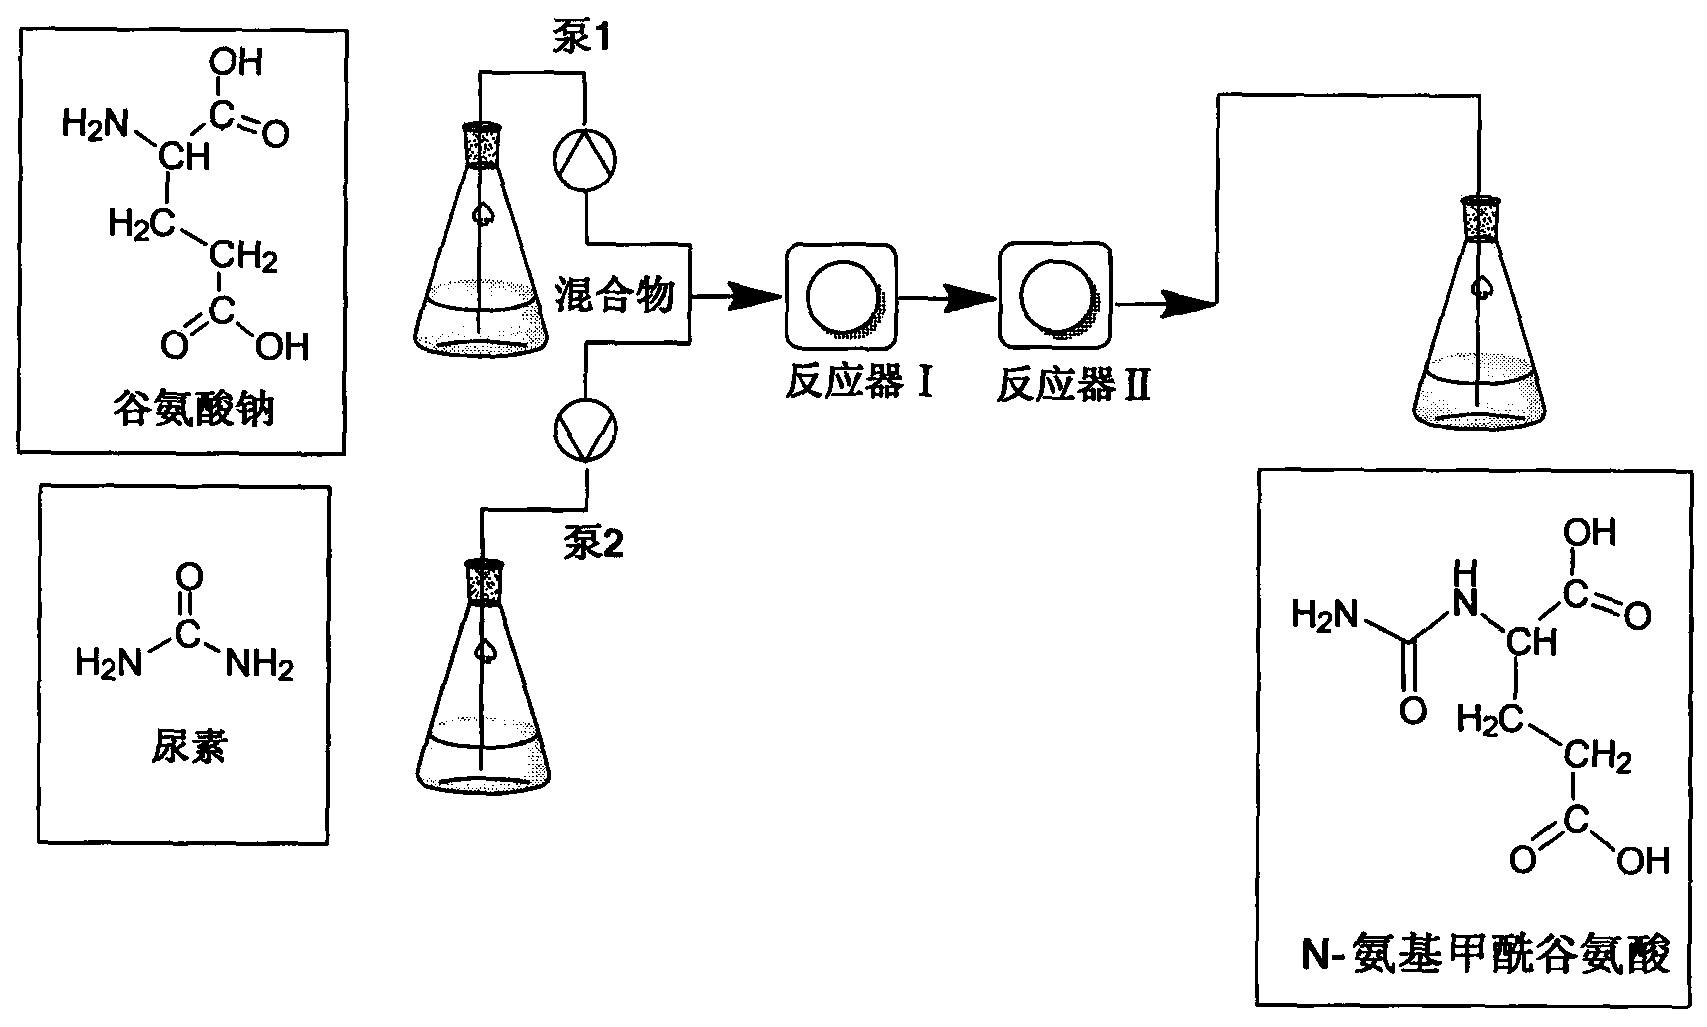 Method for continuously synthesizing N-carbamylglutamic acid by using micro-channel reactor